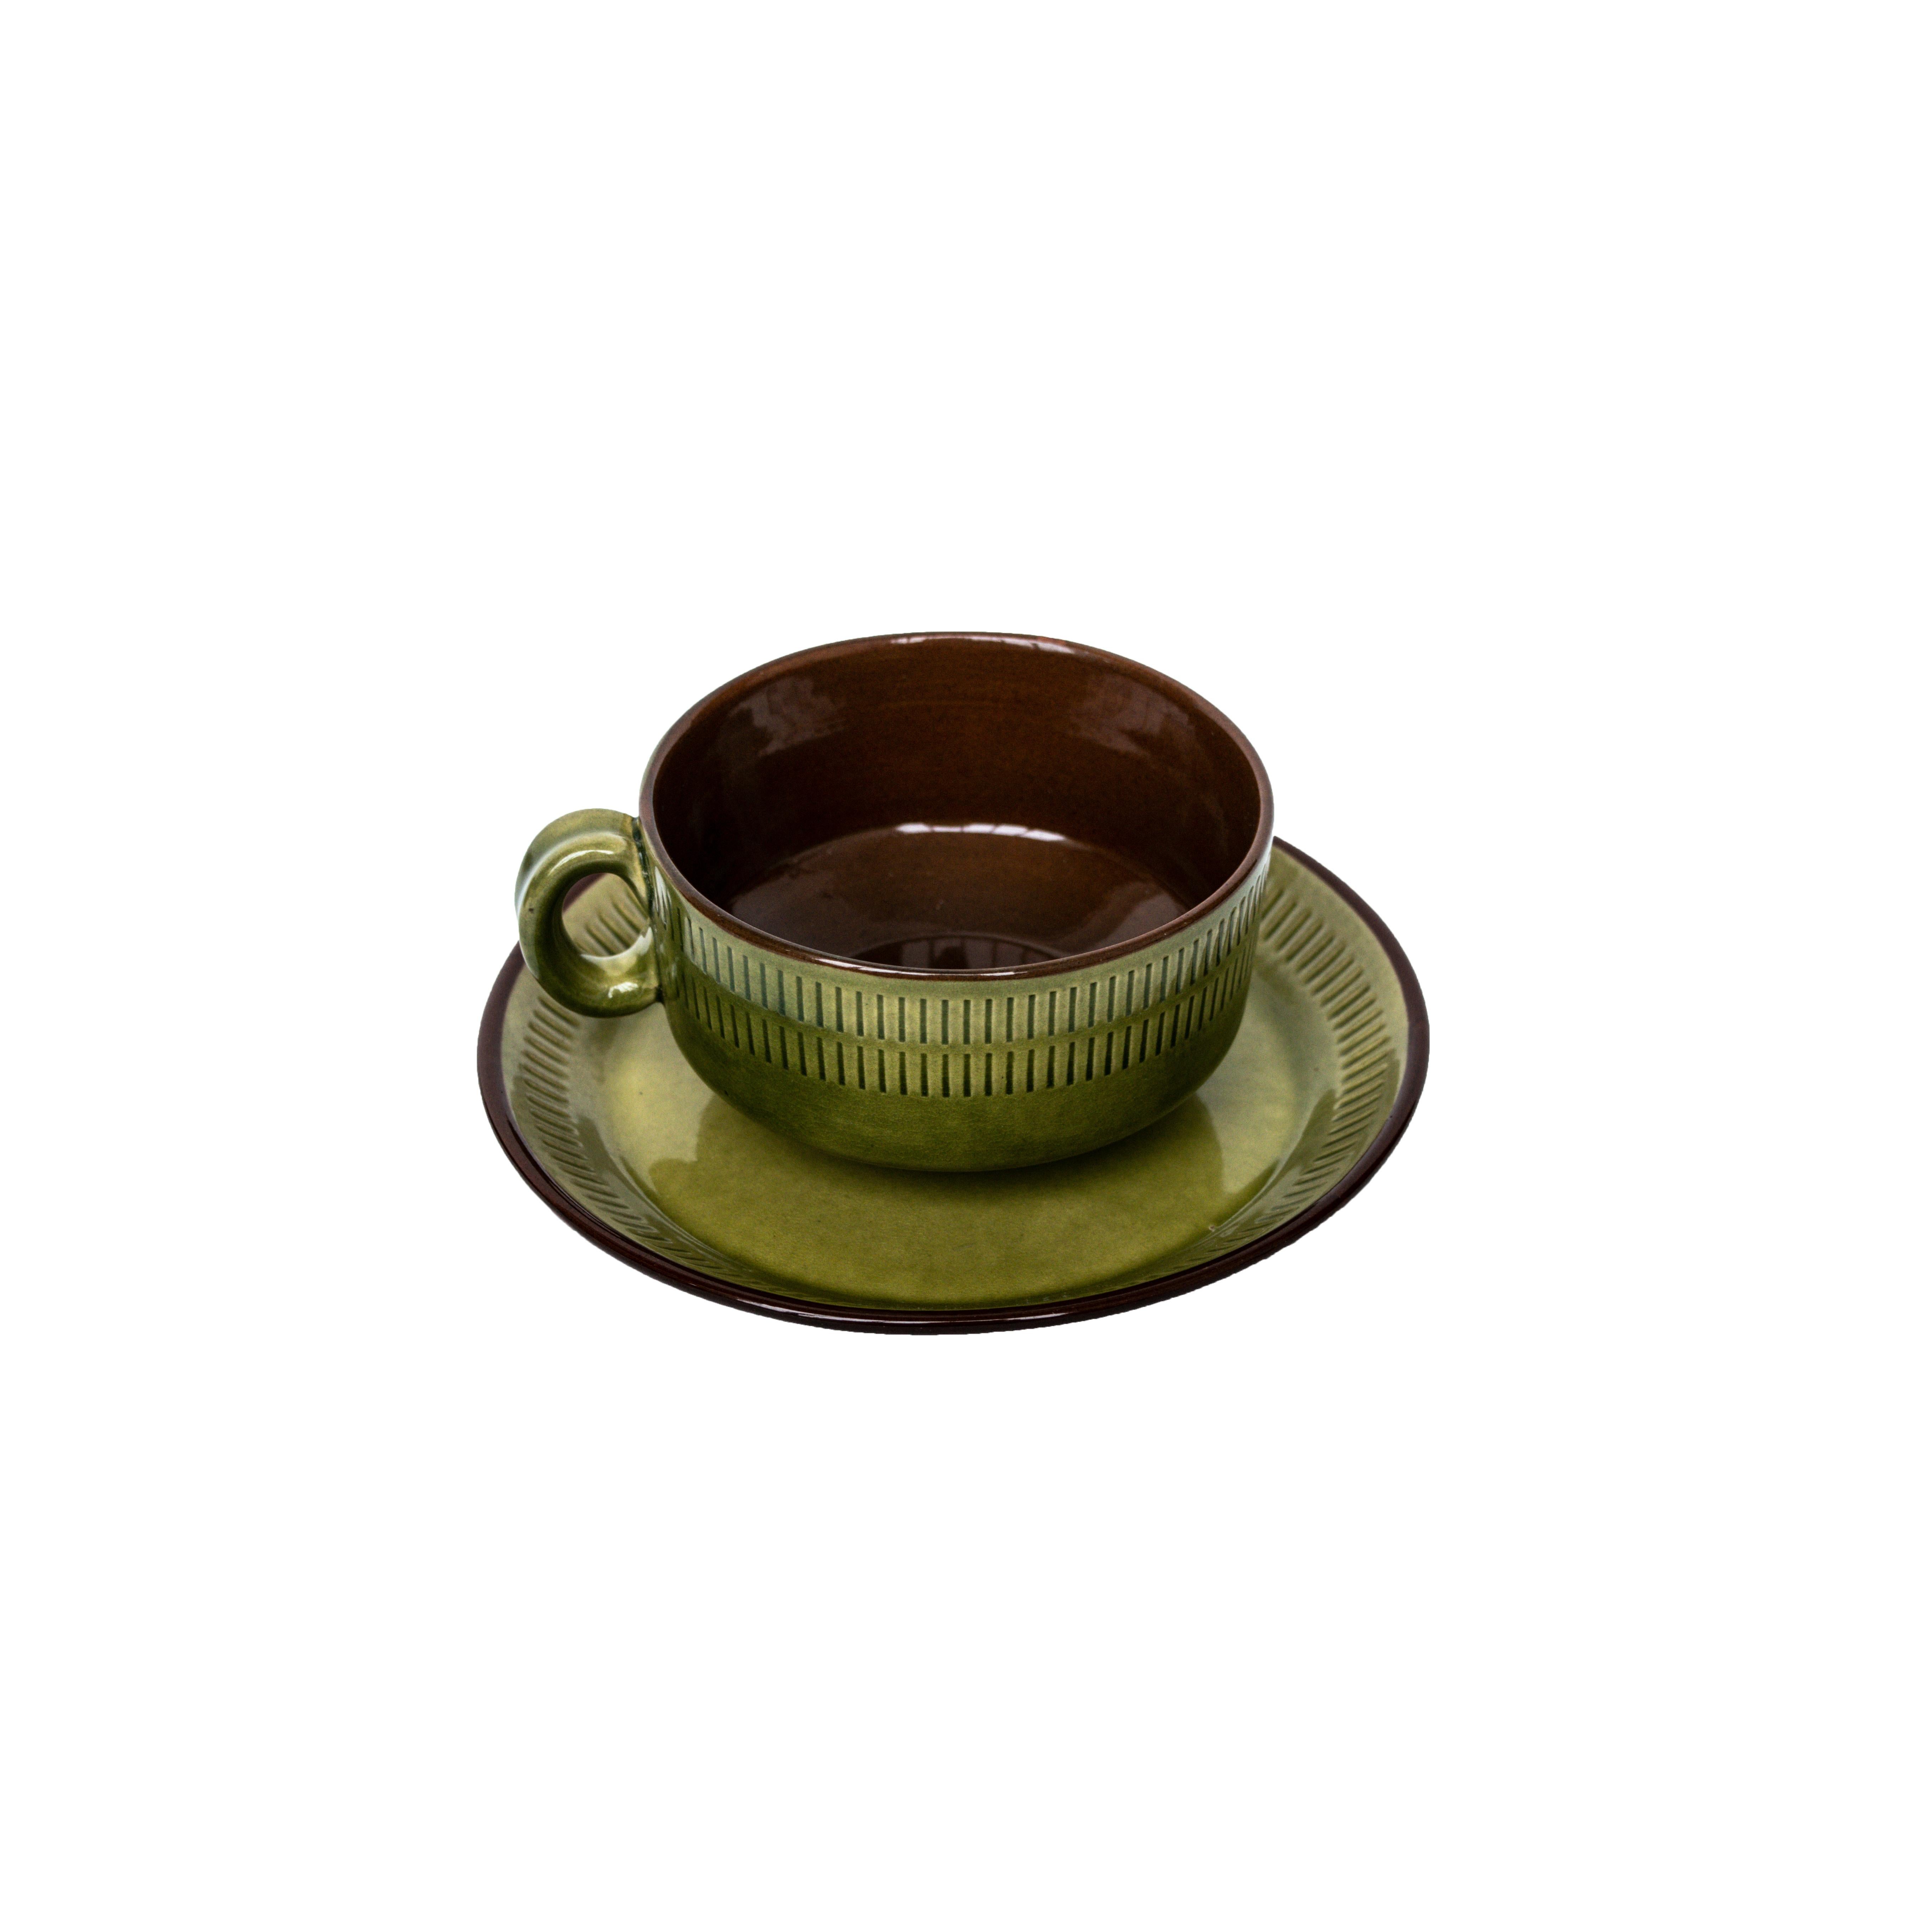 Swedish Vintage Tea Set in Beautiful Green Color from Sweden, 1960s For Sale